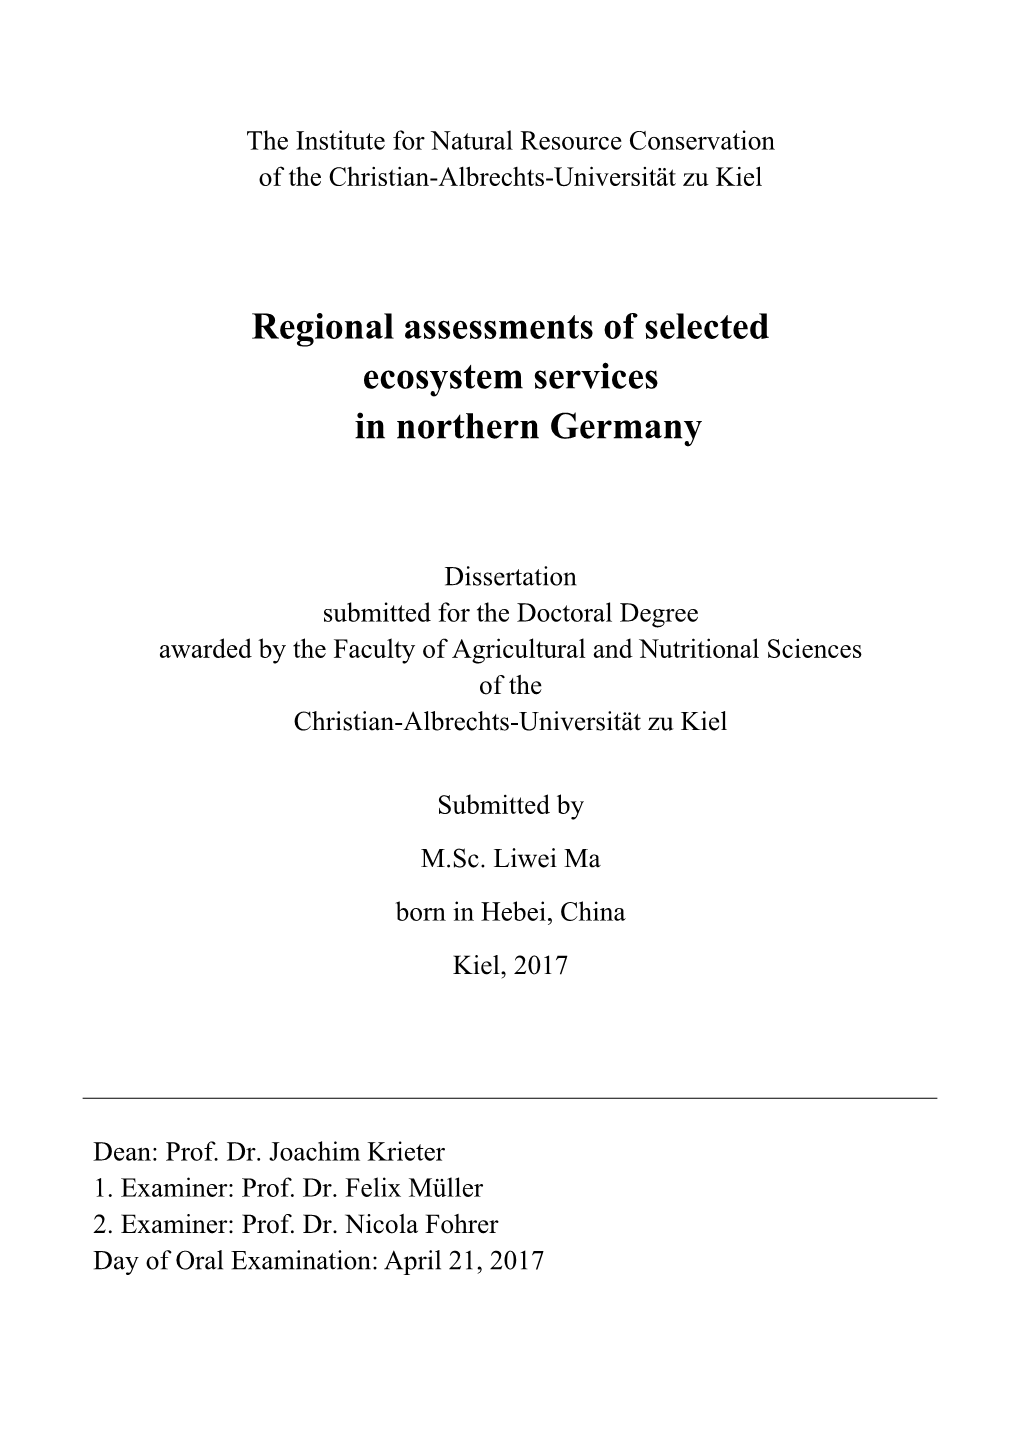 Regional Assessments of Selected Ecosystem Services in Northern Germany